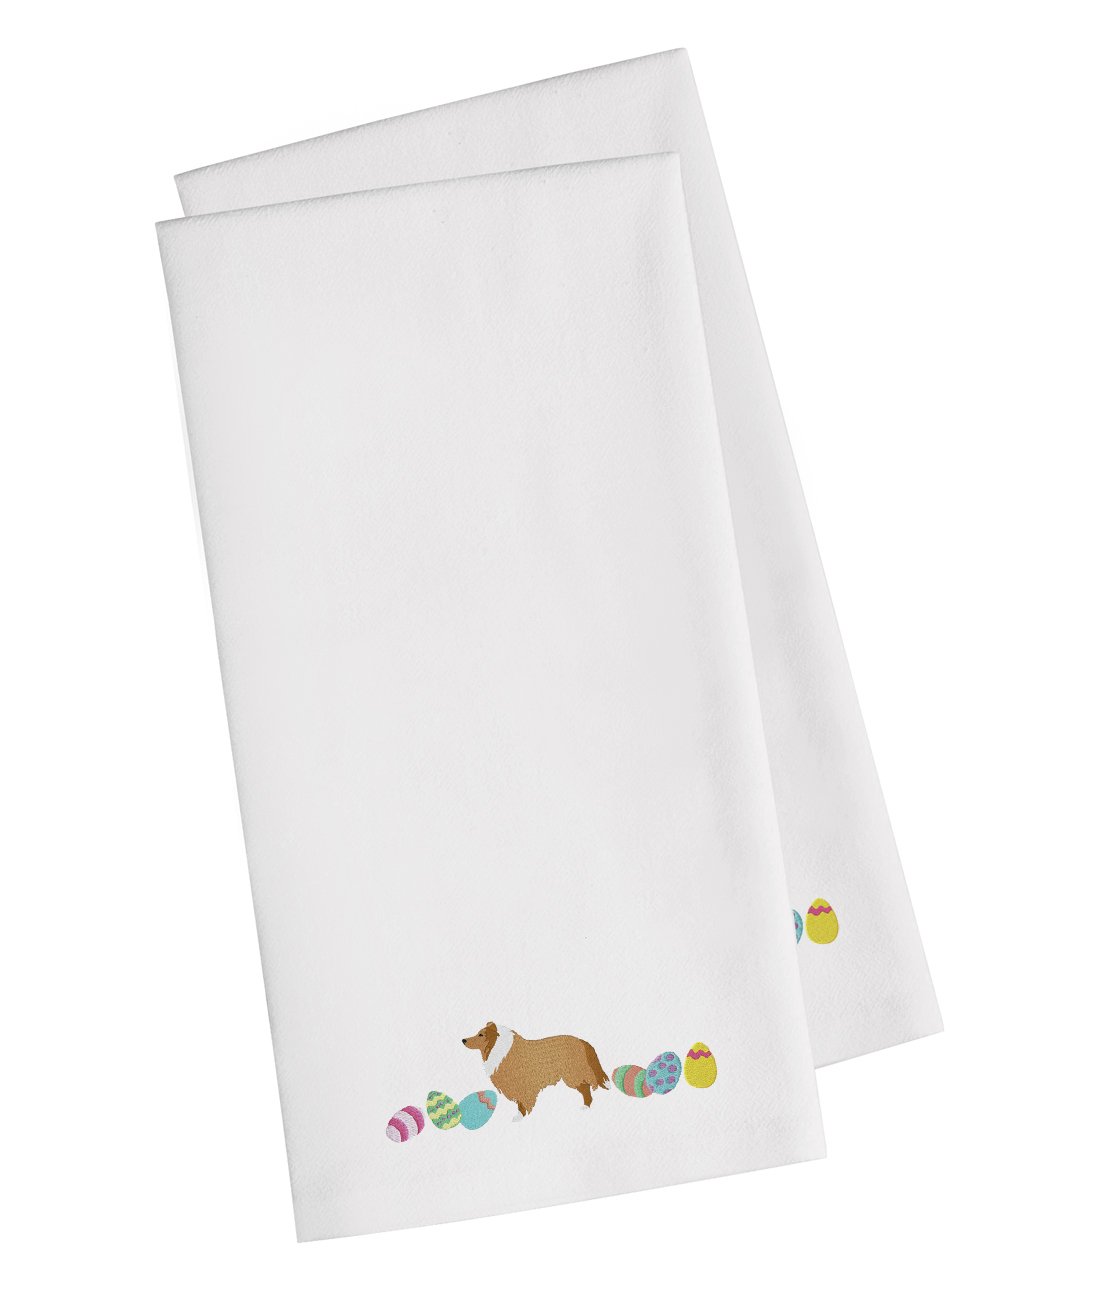 Collie Easter White Embroidered Kitchen Towel Set of 2 CK1628WHTWE by Caroline's Treasures